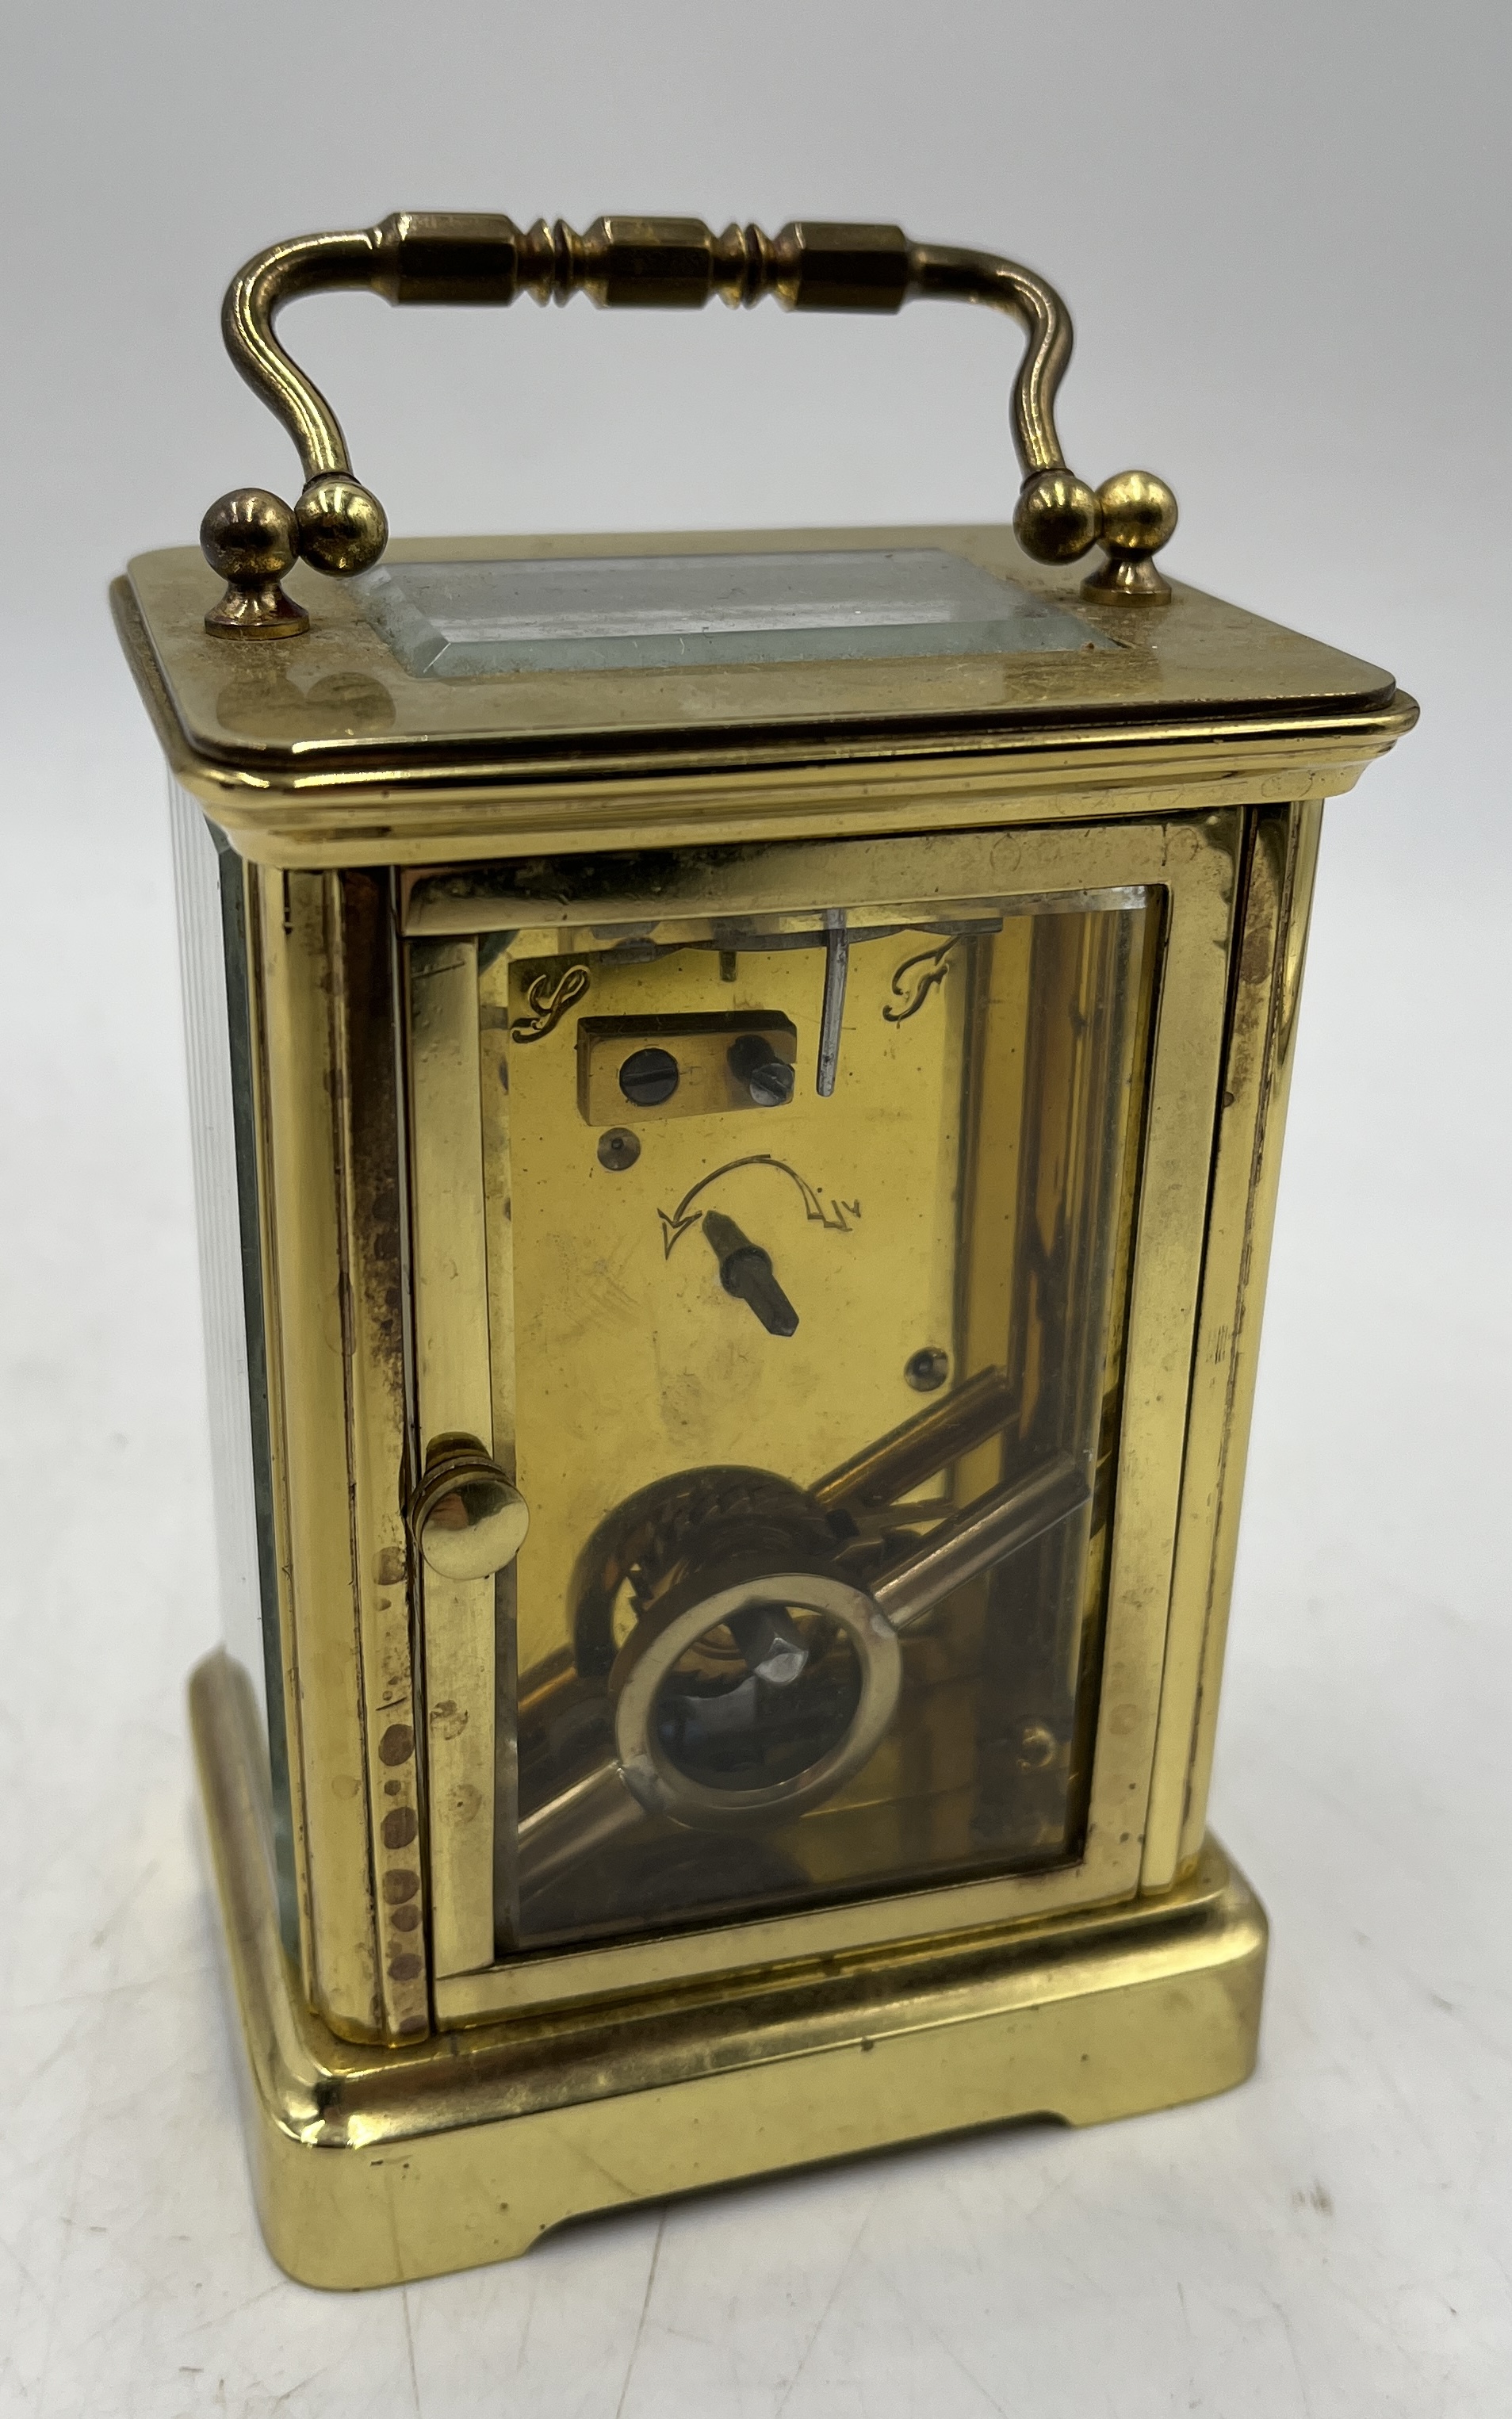 A brass carriage clock with porcelain dial and Arabic numerals - Image 4 of 4